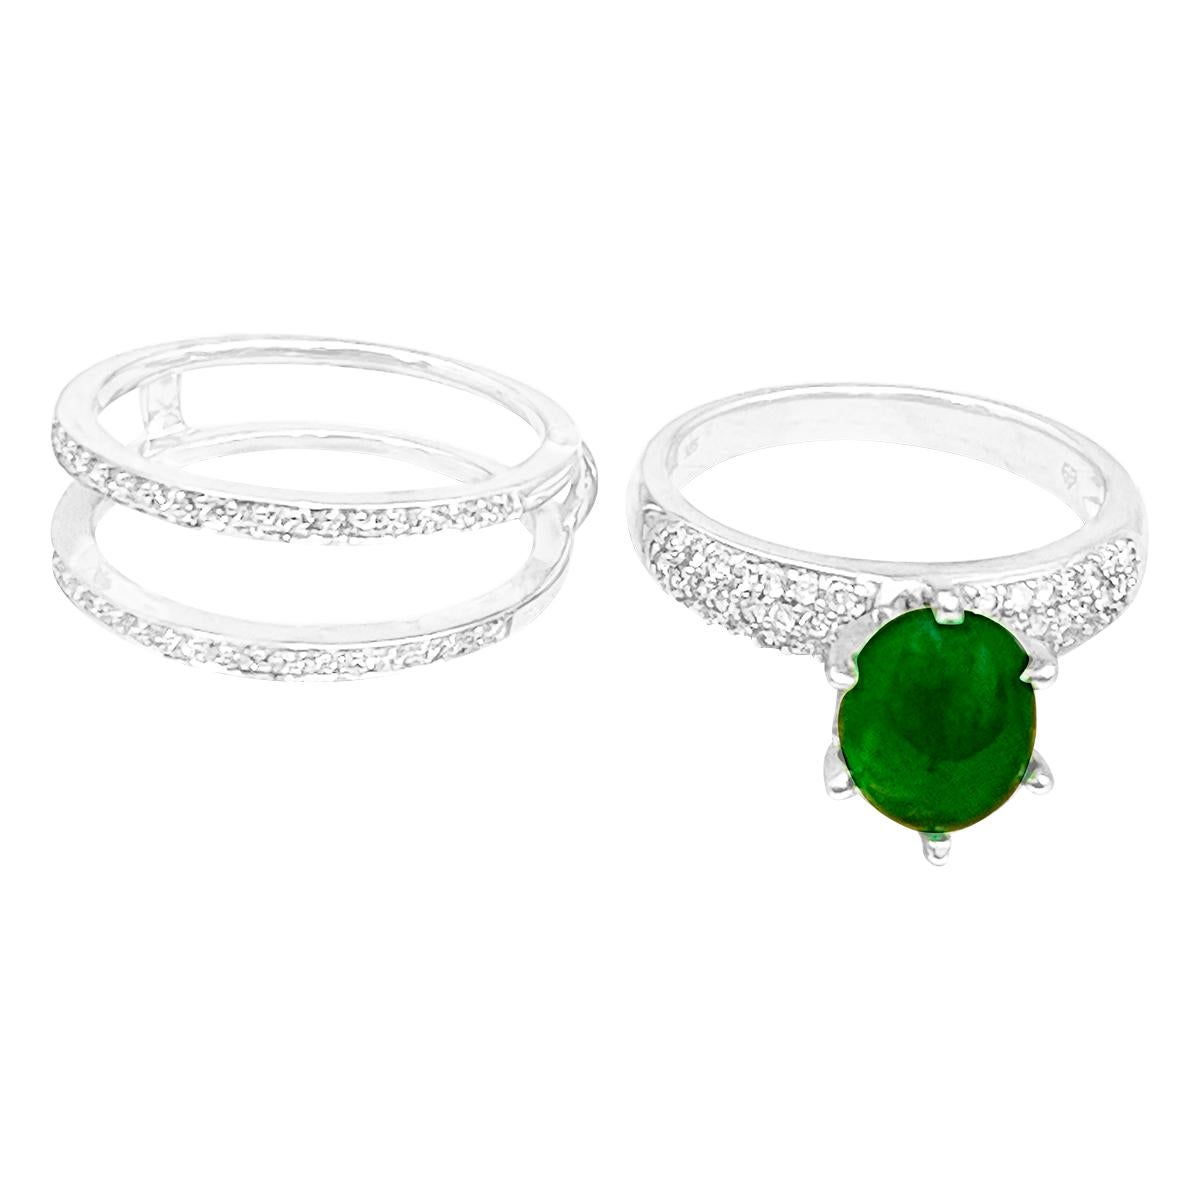 A classic, Cocktail ring 
2 Carat Zambian Emerald Cabochon & Diamond Cocktail  Ring 14 Karat White Gold with diamond band  , Estate with no color enhancement. 
Gold: 14 Karat  White  gold ,
Weight: 7.2 gram with stone 
Diamond approximately 0.85